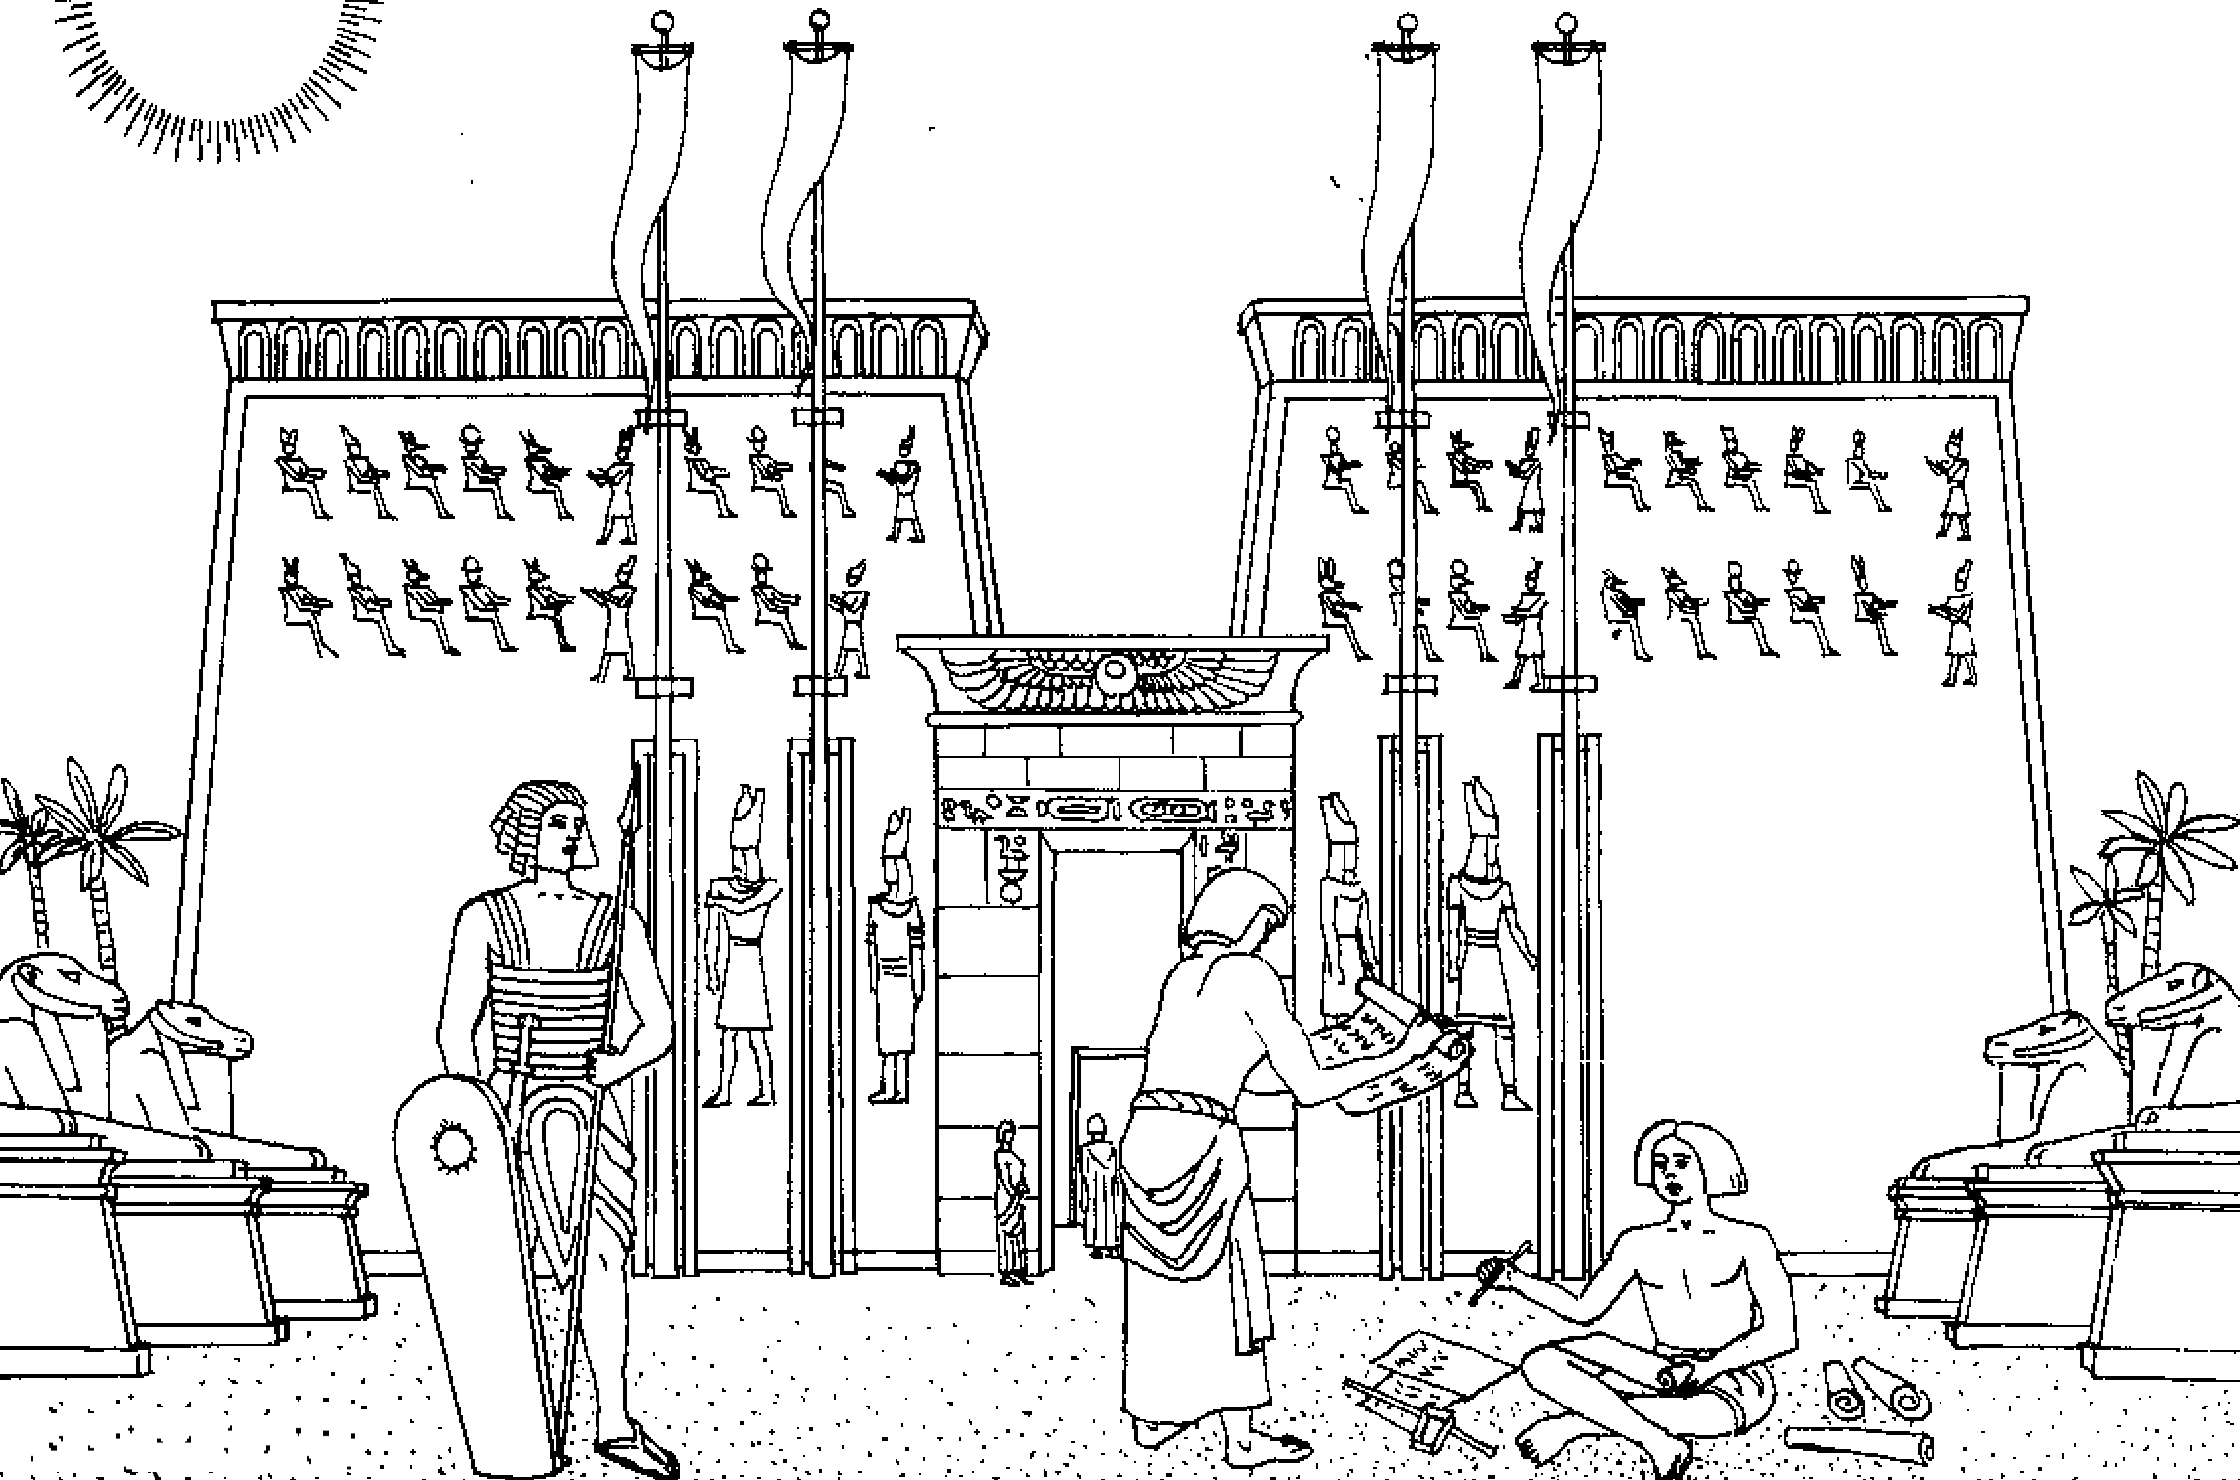 Egypt coloring page to print and color